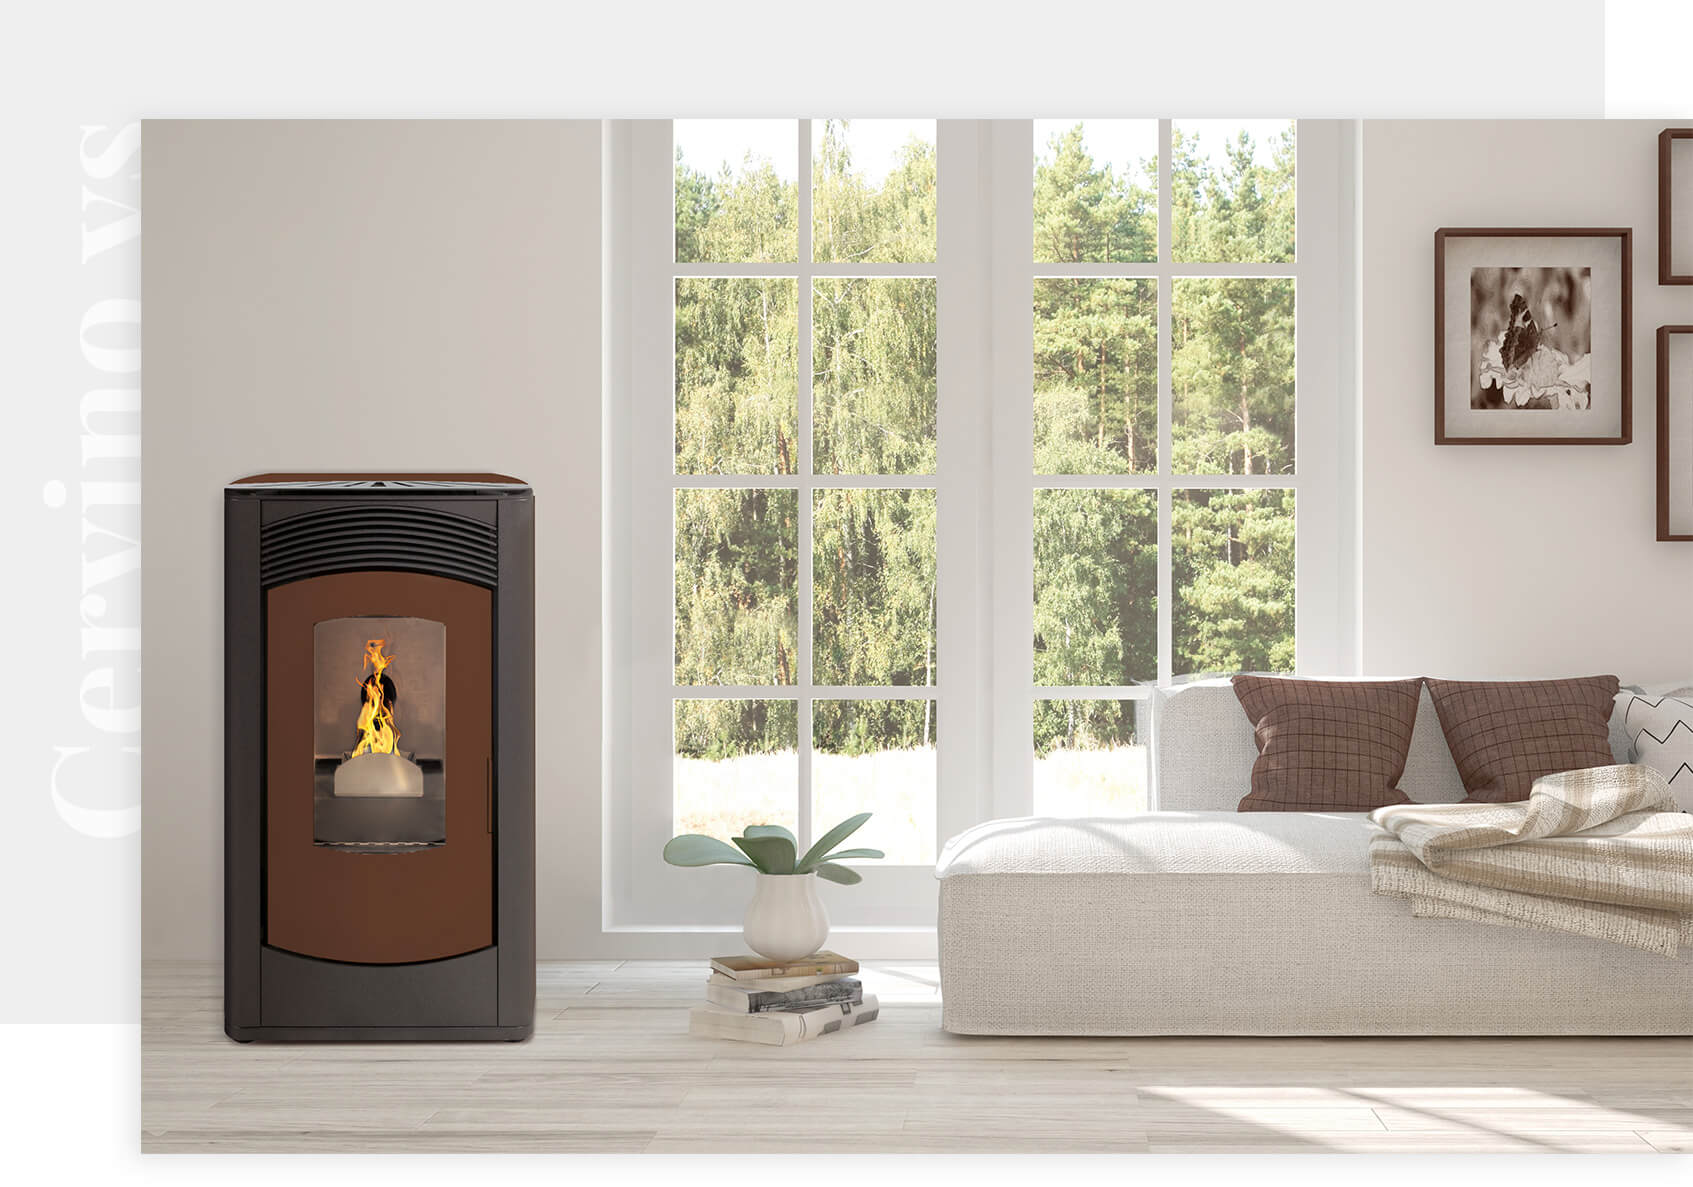 Euroalpi pellet stoves - Cervino young style